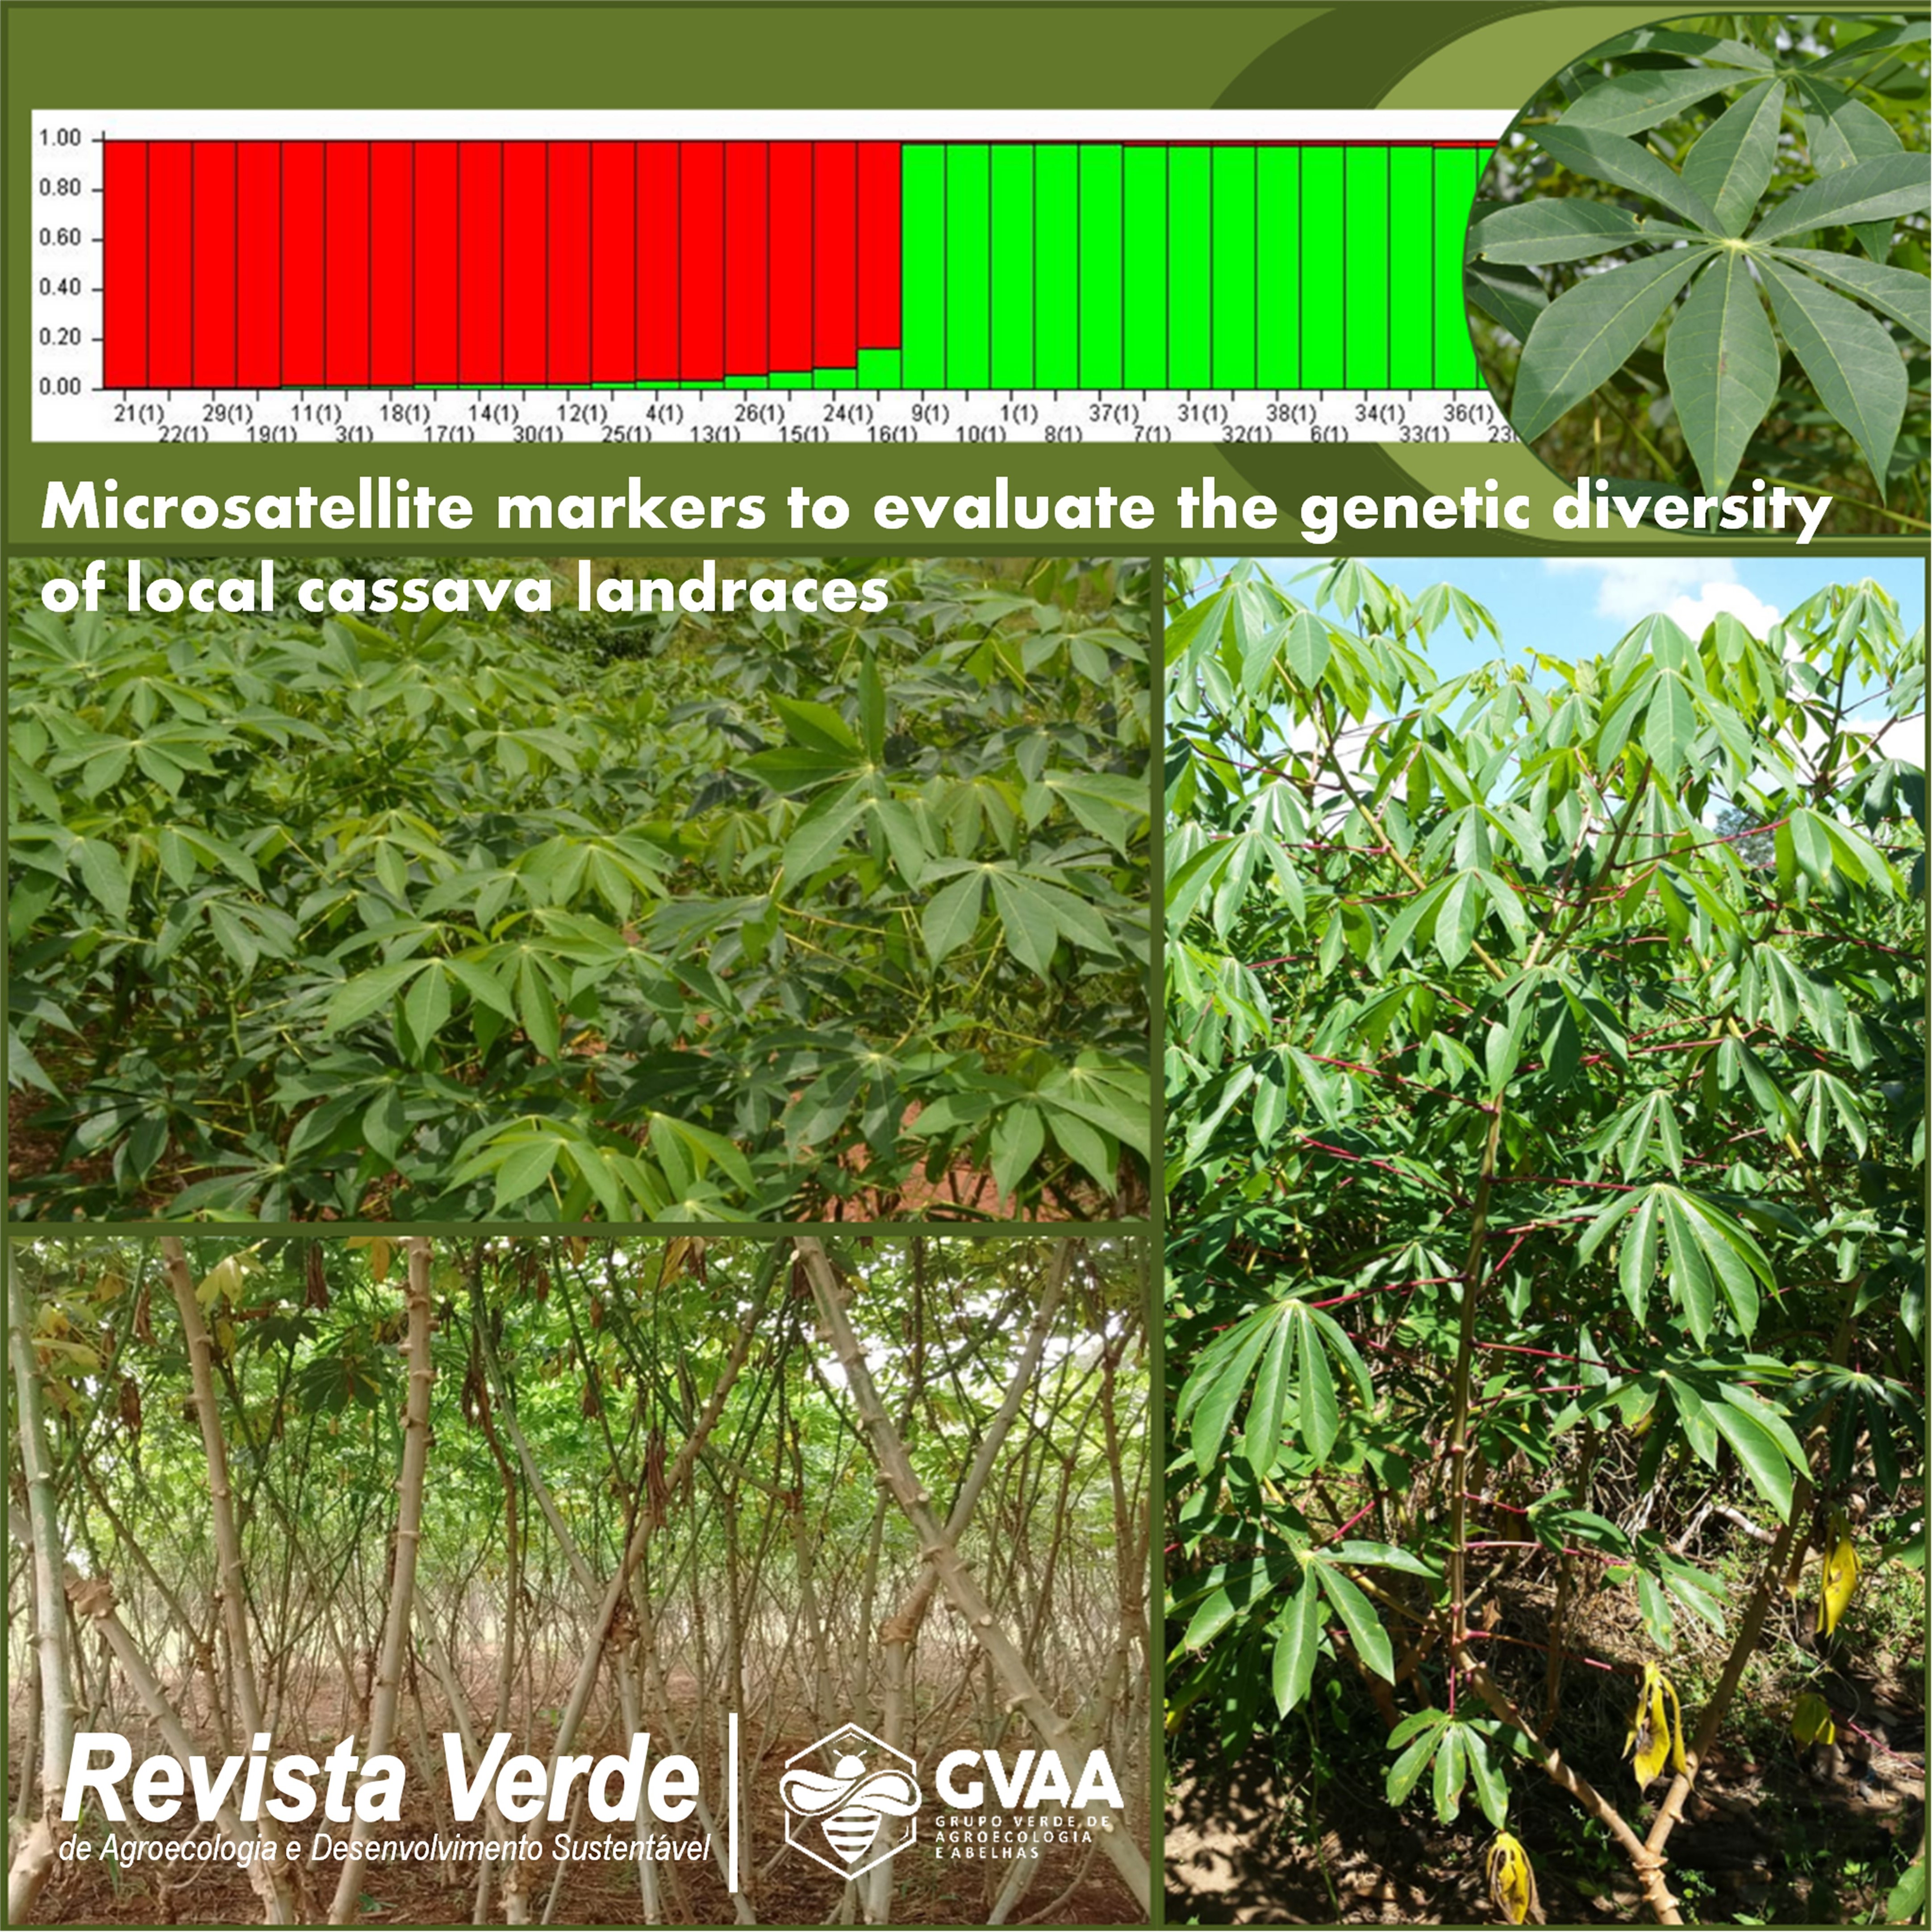 Use of microsatellite markers to evaluate the genetic diversity of local cassava landraces